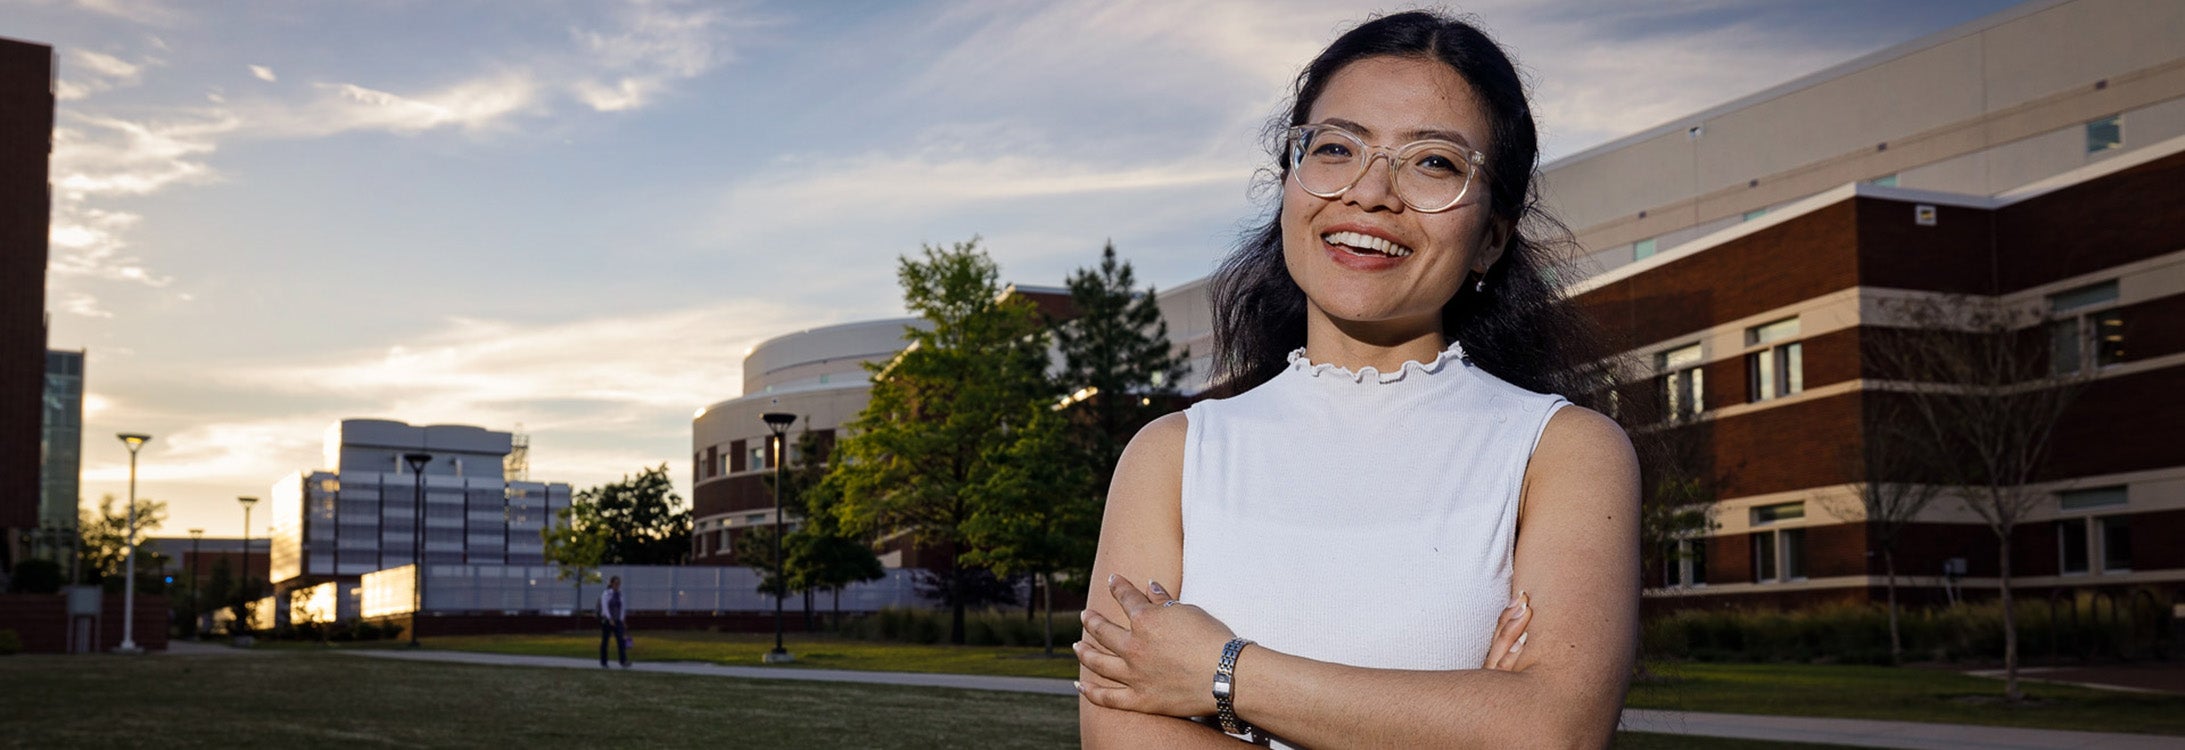 After moving more than 8,000 miles from Nepal to Greenville, graduate student Insha Pun prepares to celebrate earning her master's degree in health communication.